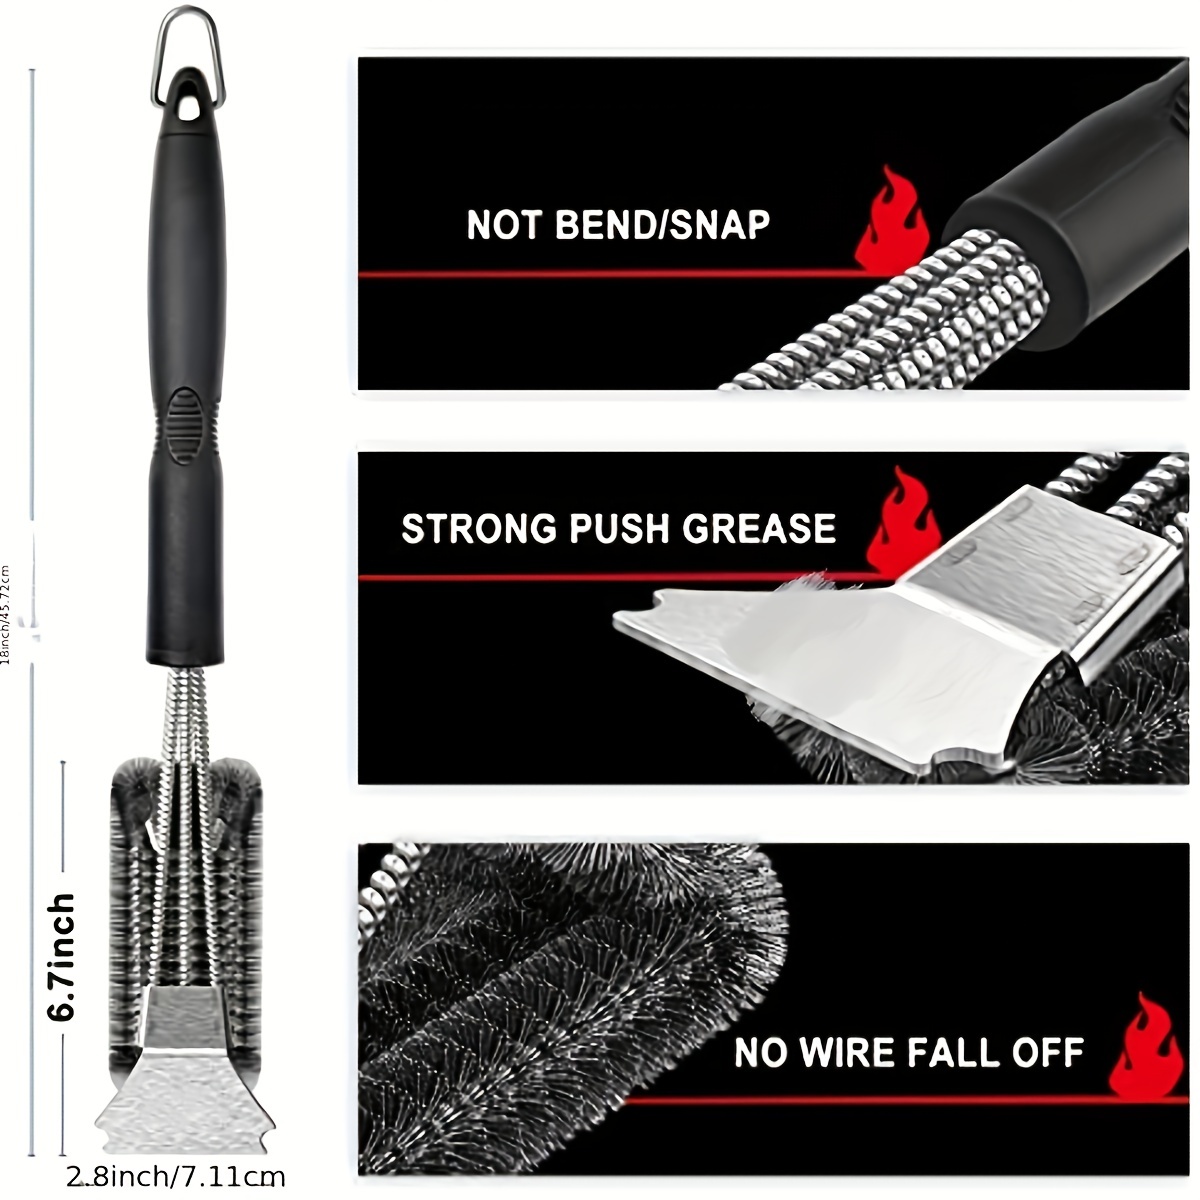 GRILLART Grill Brush and Scraper Best BBQ Brush for Grill, Safe 18  Stainless Steel Woven Wire 3 in 1 Bristles Grill Cleaning Brush 